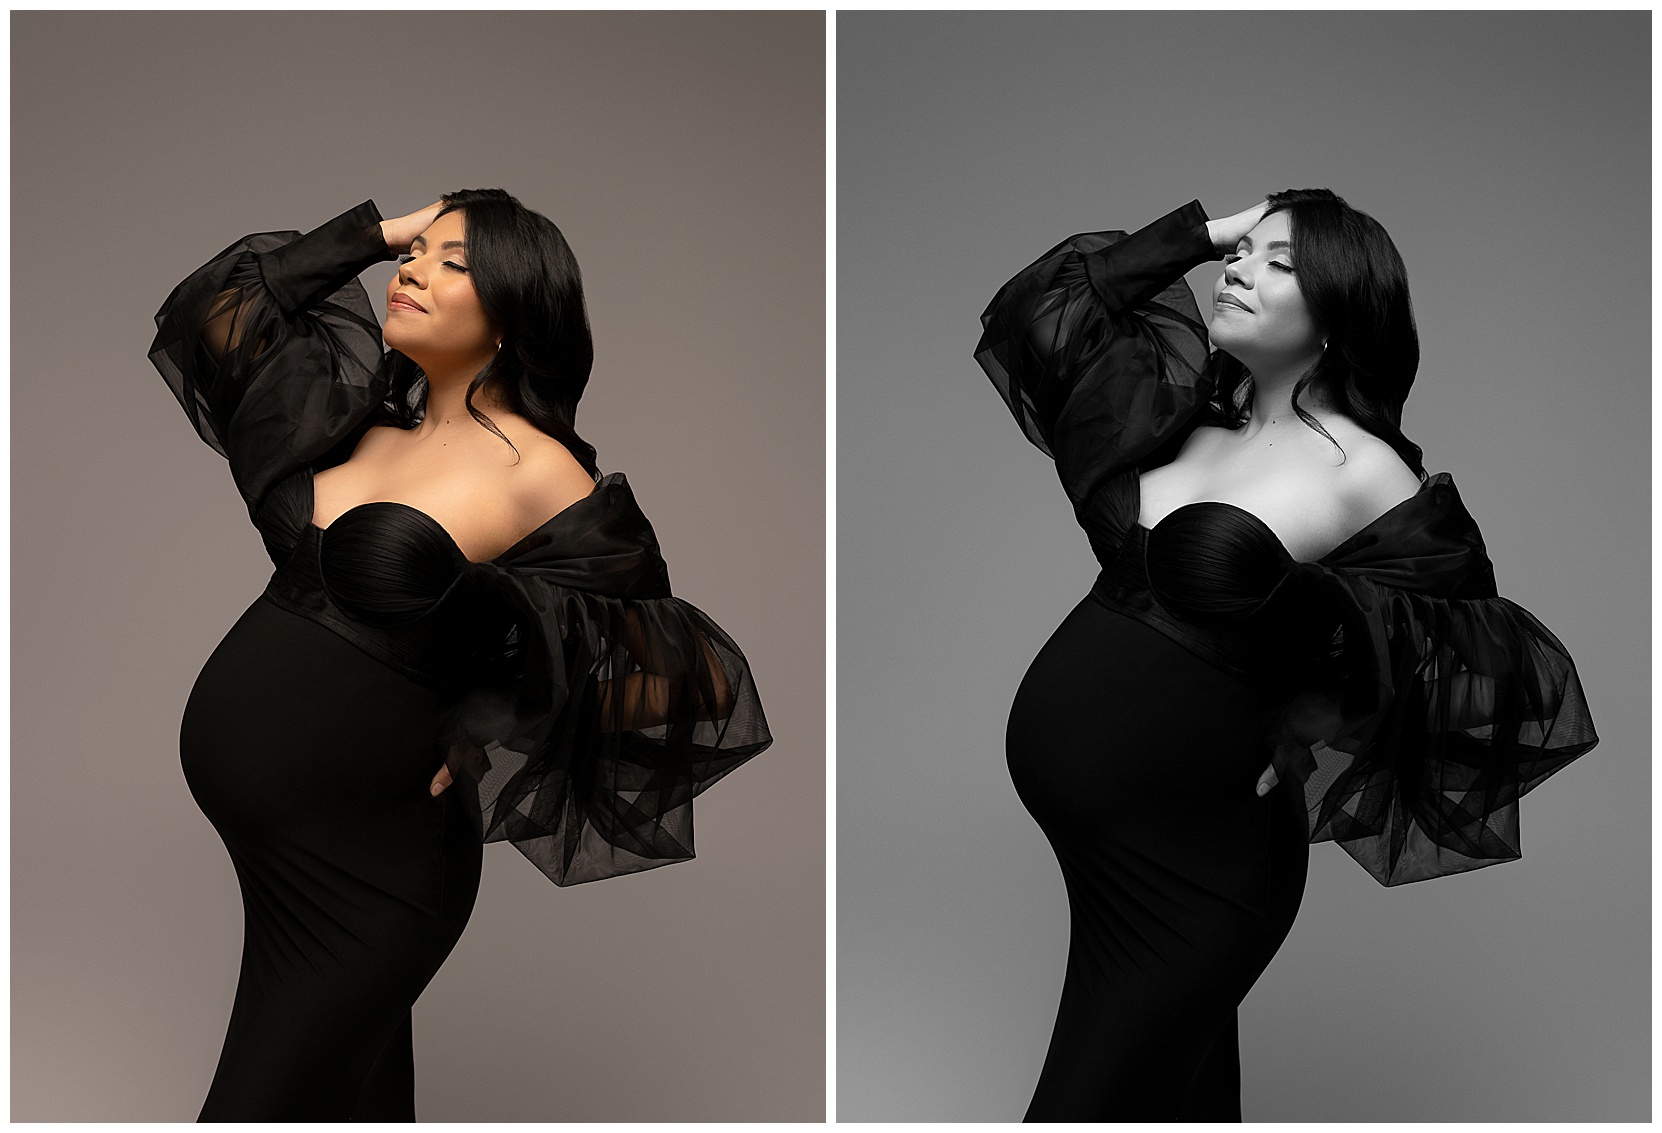 Two photos, one in color and one in black and white, of a pregnant woman with dark hair in a black maternity gown with puffy tulle sleeves